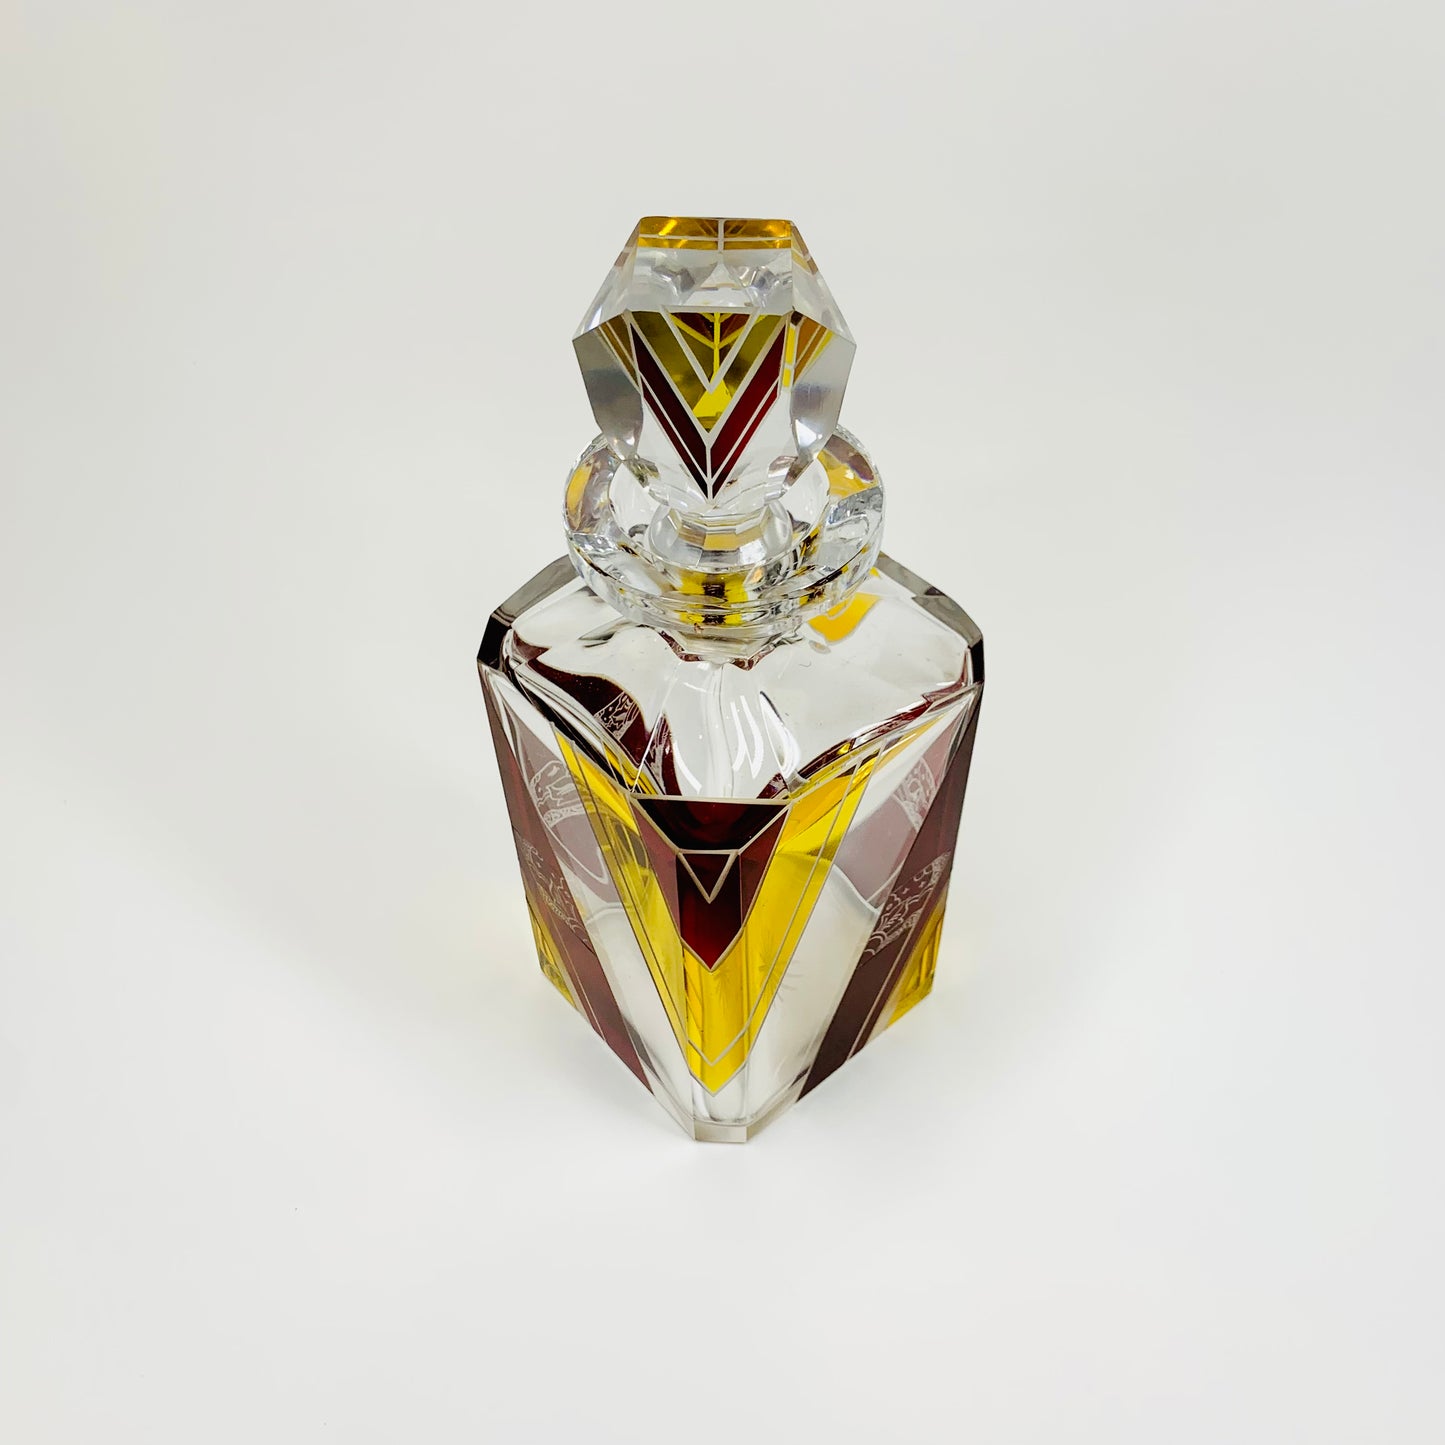 Extremely extremely rare antique Art Deco ruby & gold enamel glass decanter set by Karl Palda